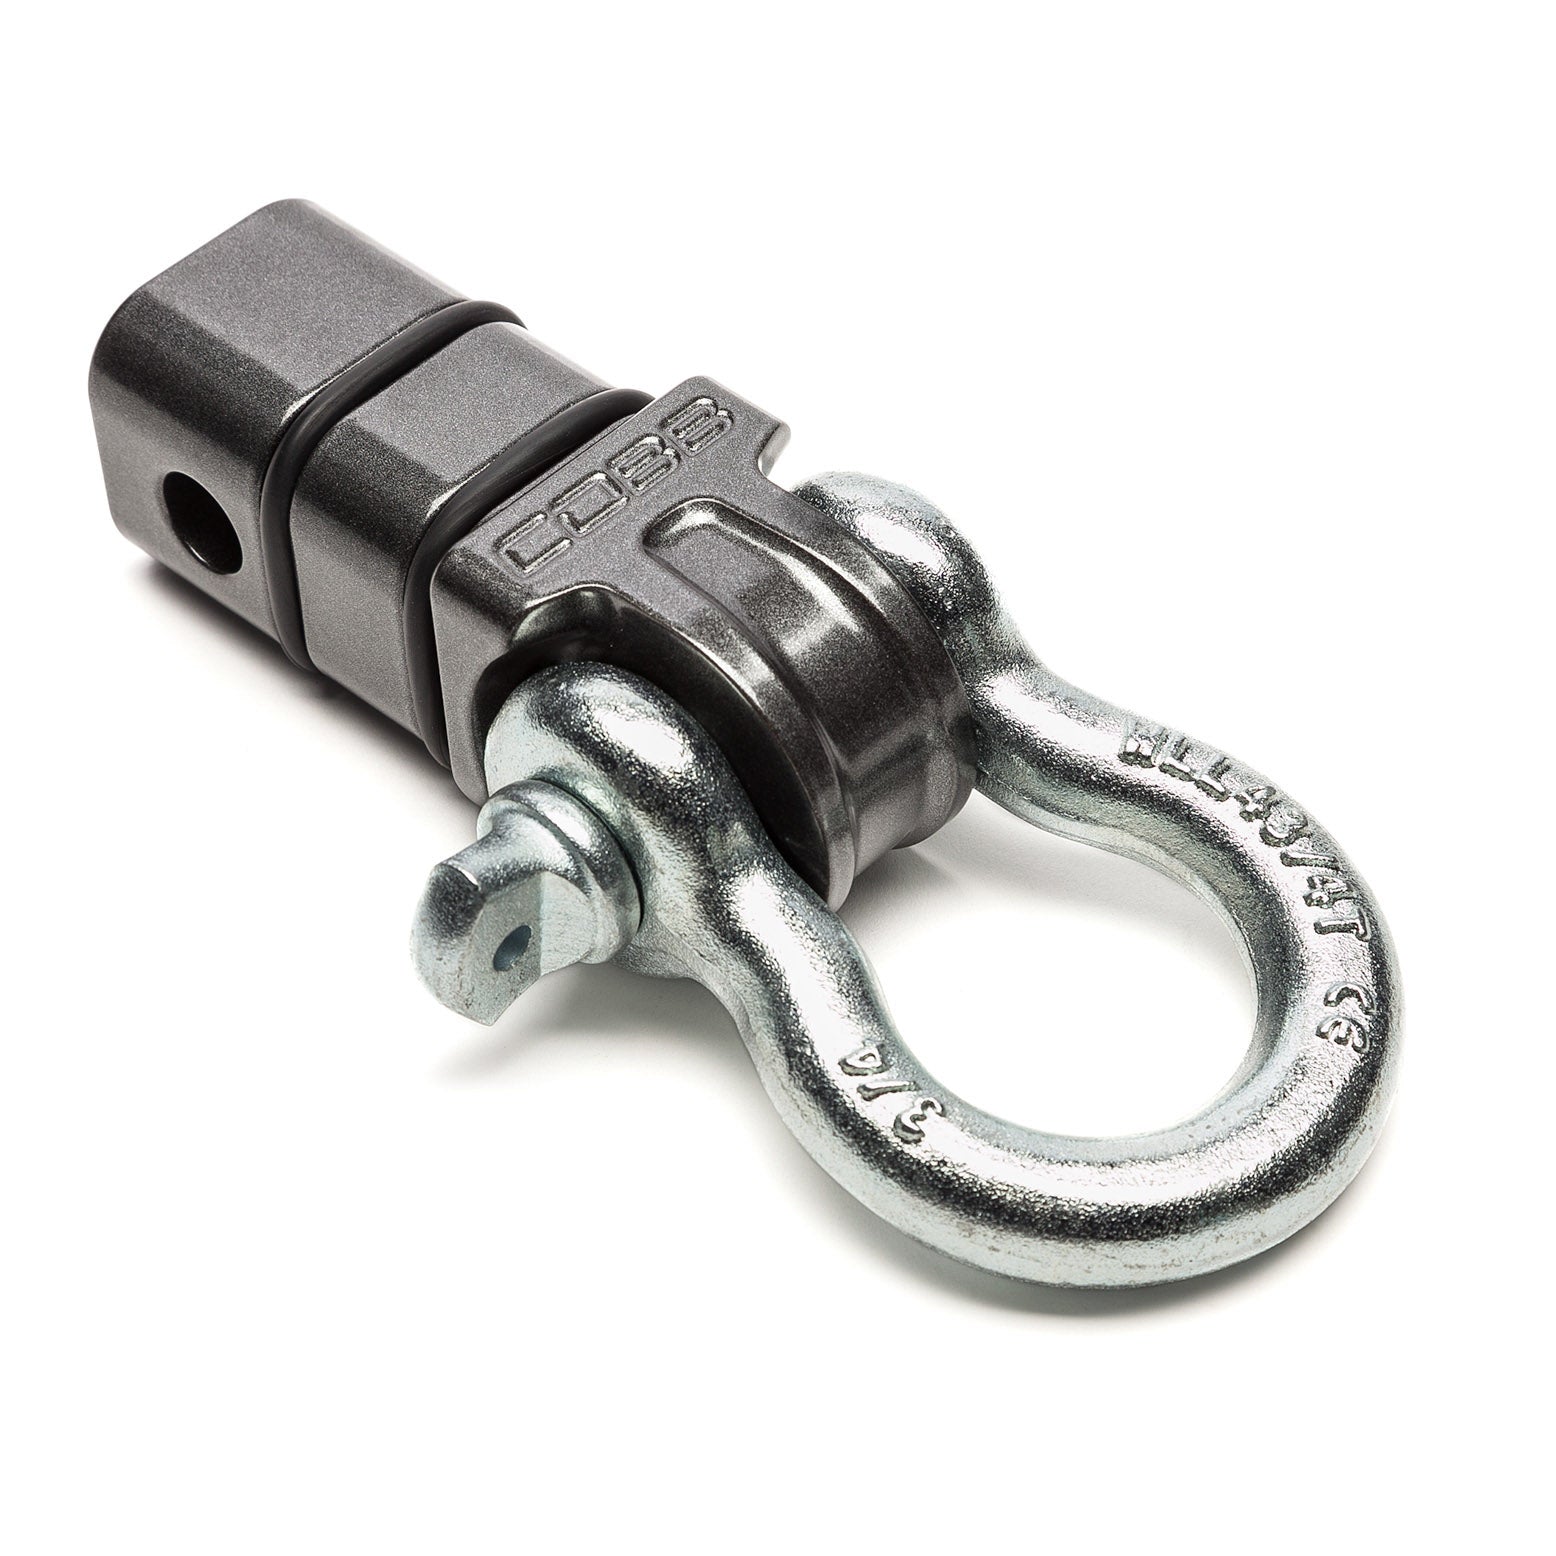 COBB Tuning 2" Hitch Receiver D-Ring Shackle